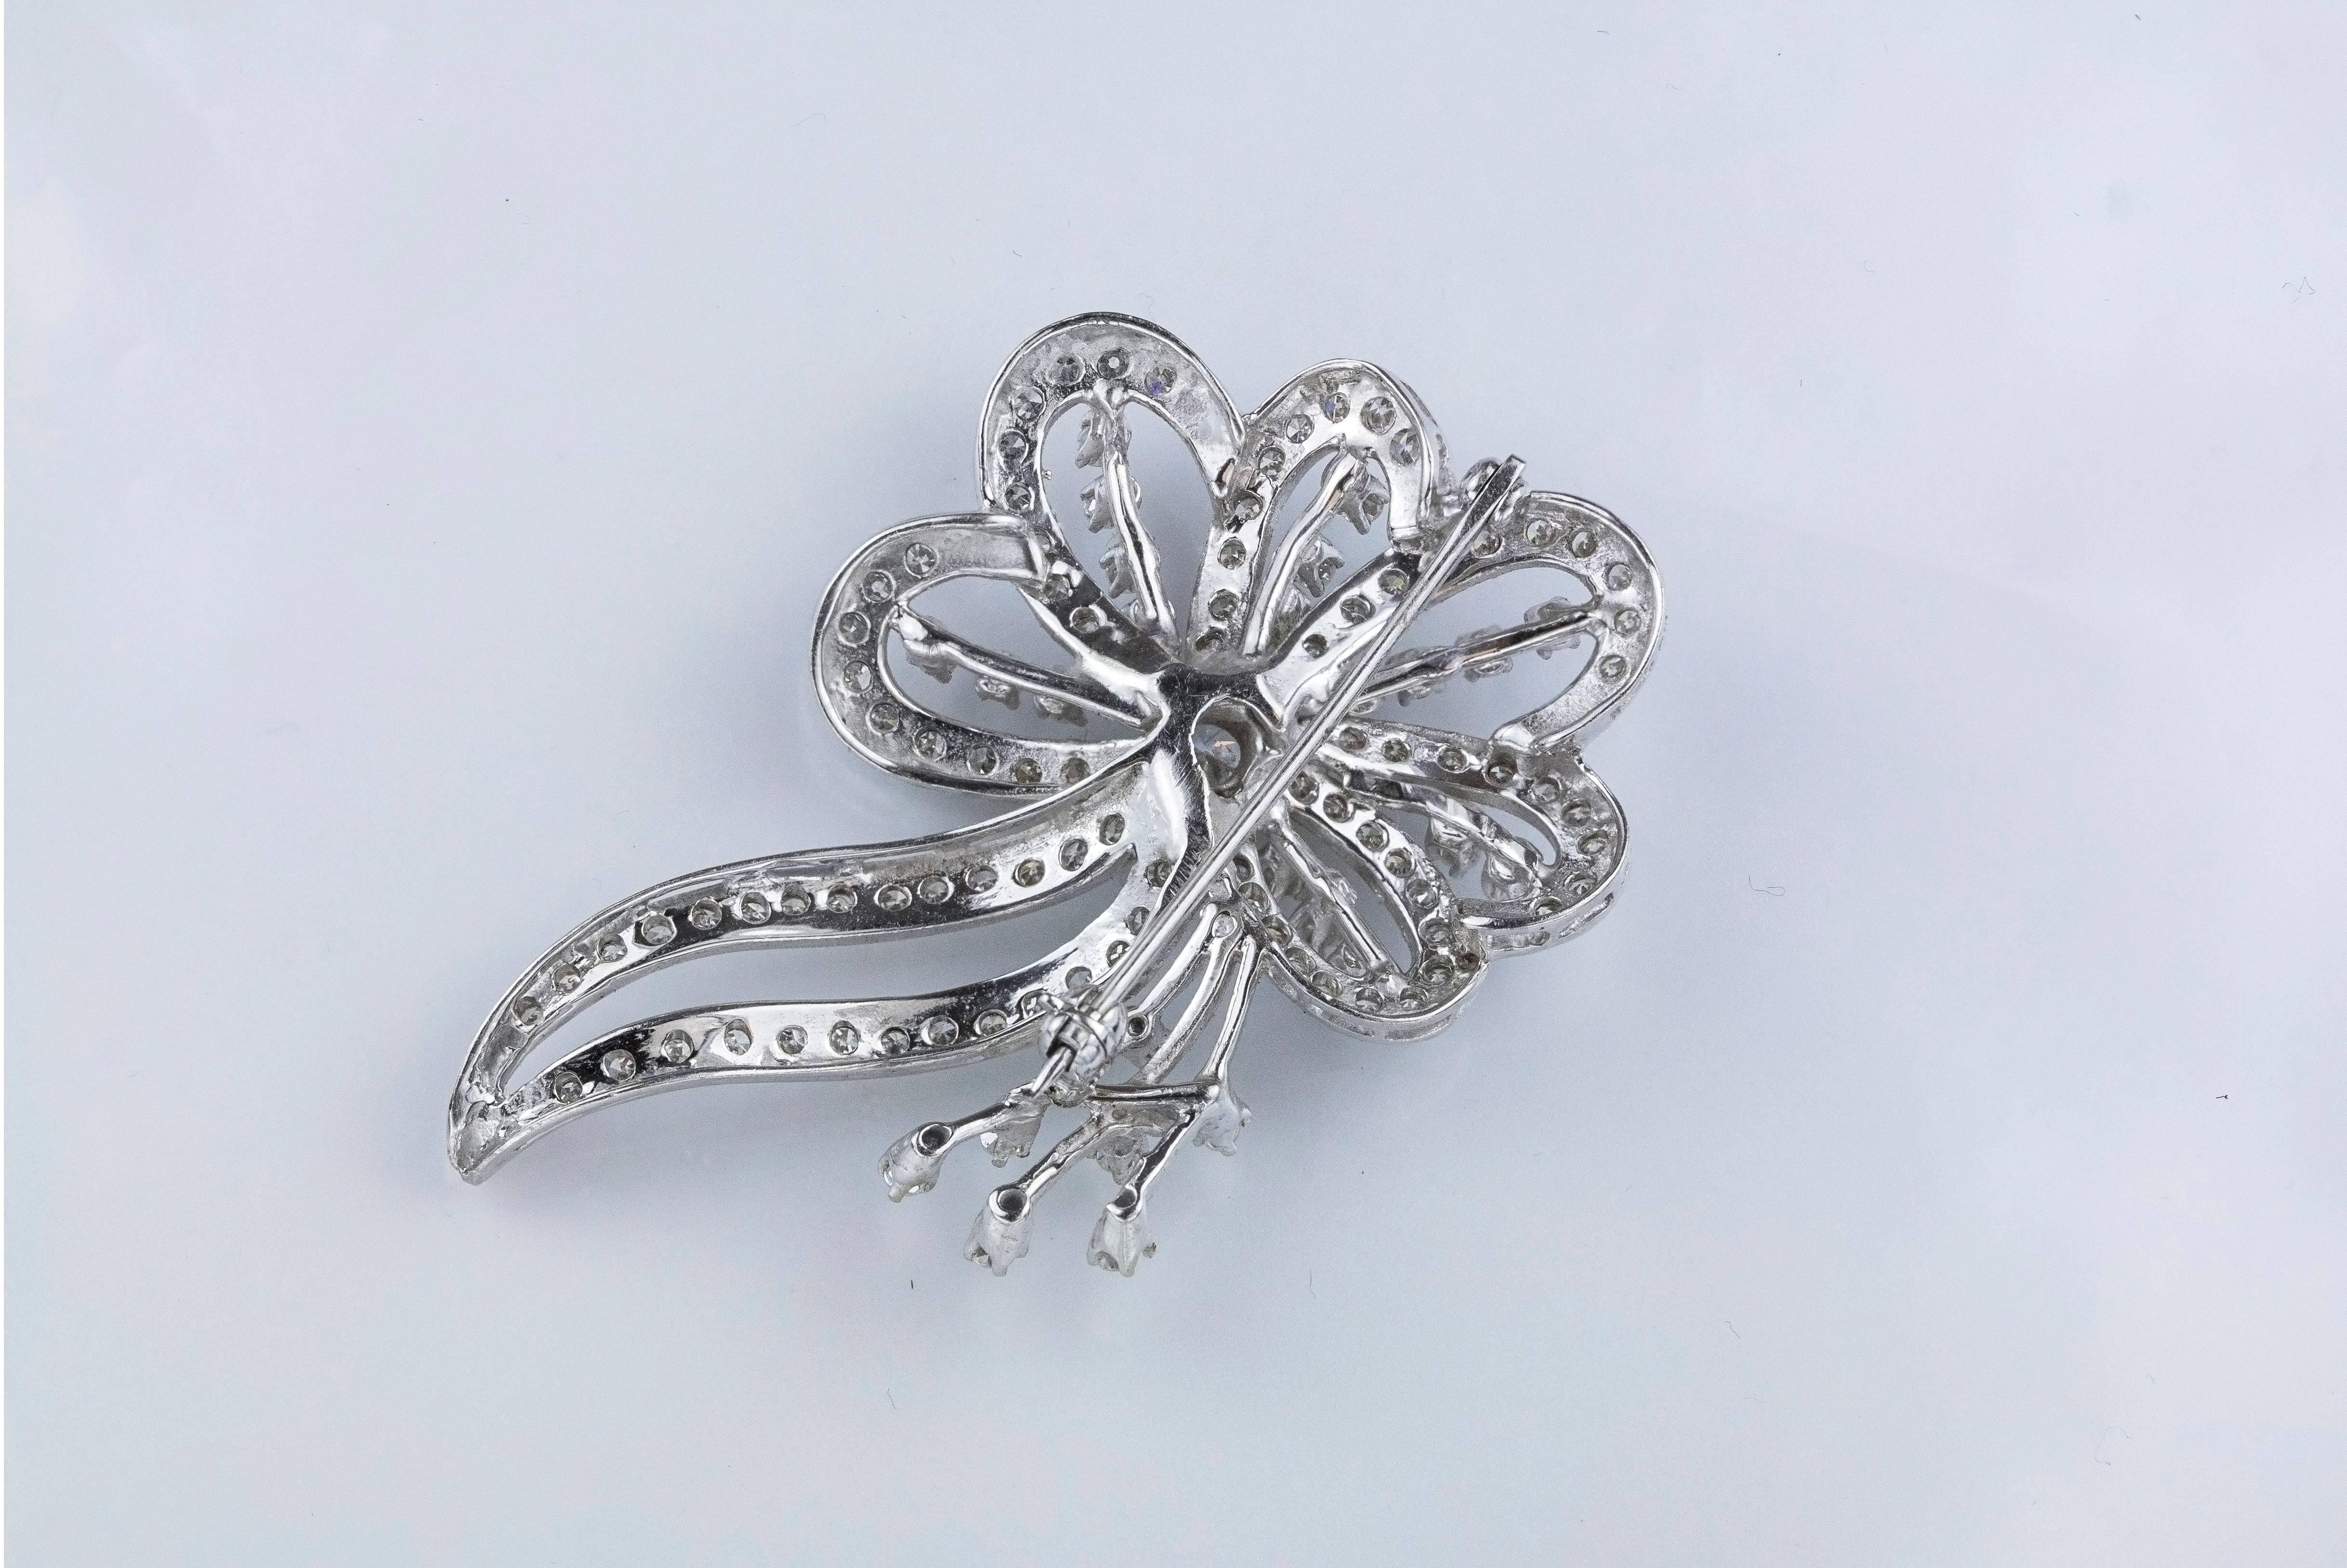 This brooch features a lovely flower design set with 116 brilliant round diamonds. The diamonds weigh 2.50 carats total. Made in 14k white gold. 